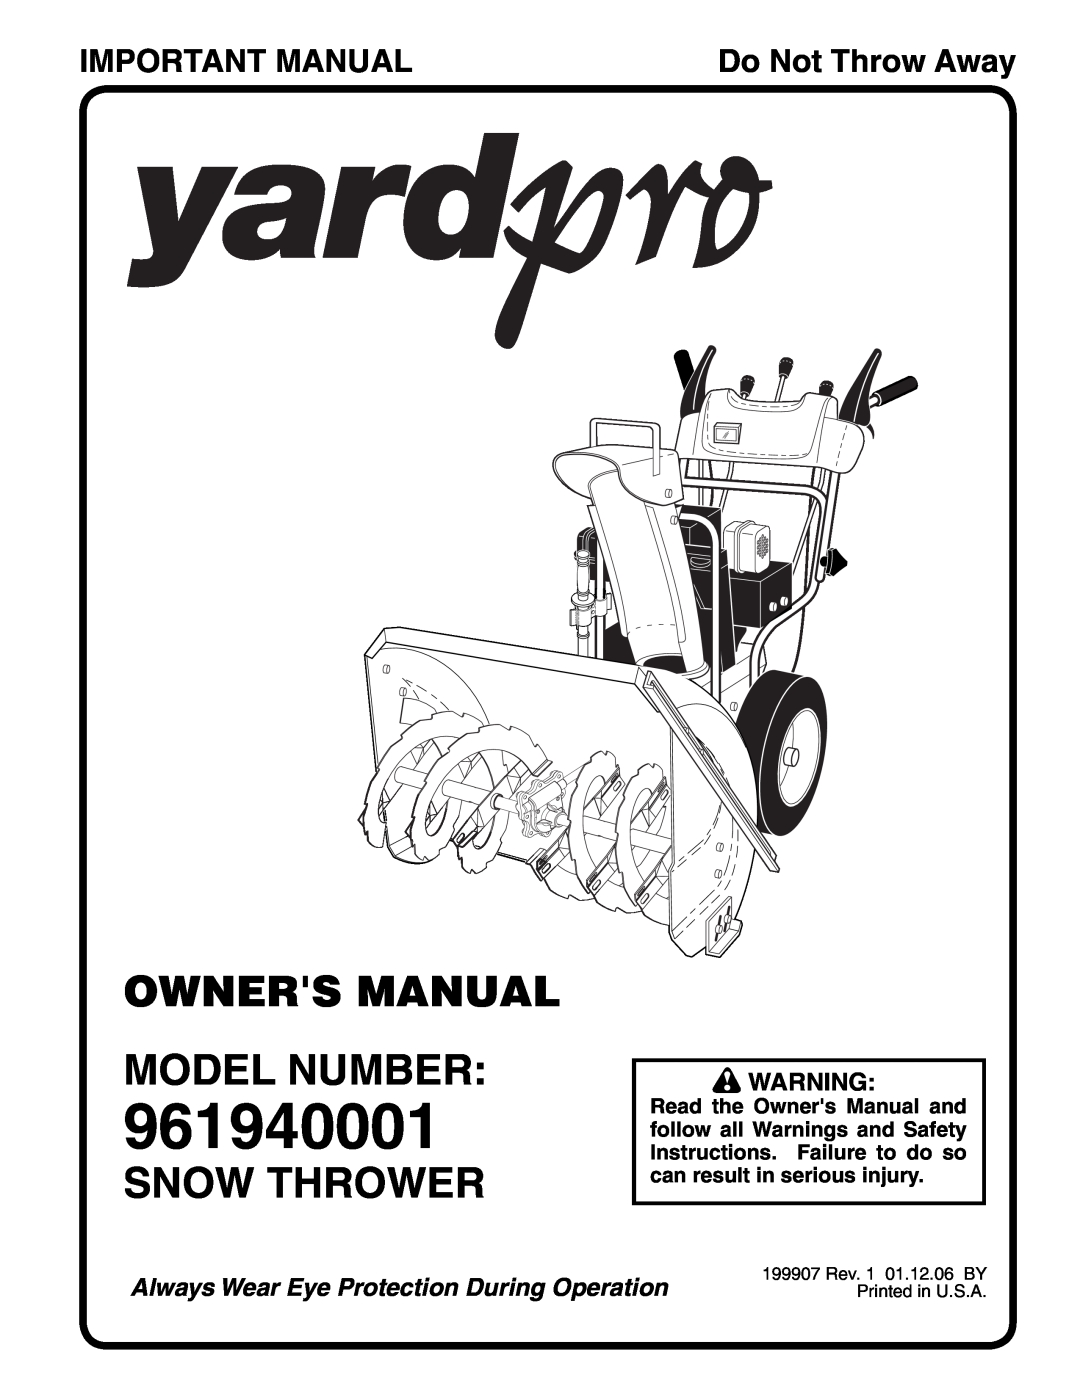 Yard Machines 961940001 owner manual Snow Thrower, Important Manual, Do Not Throw Away 